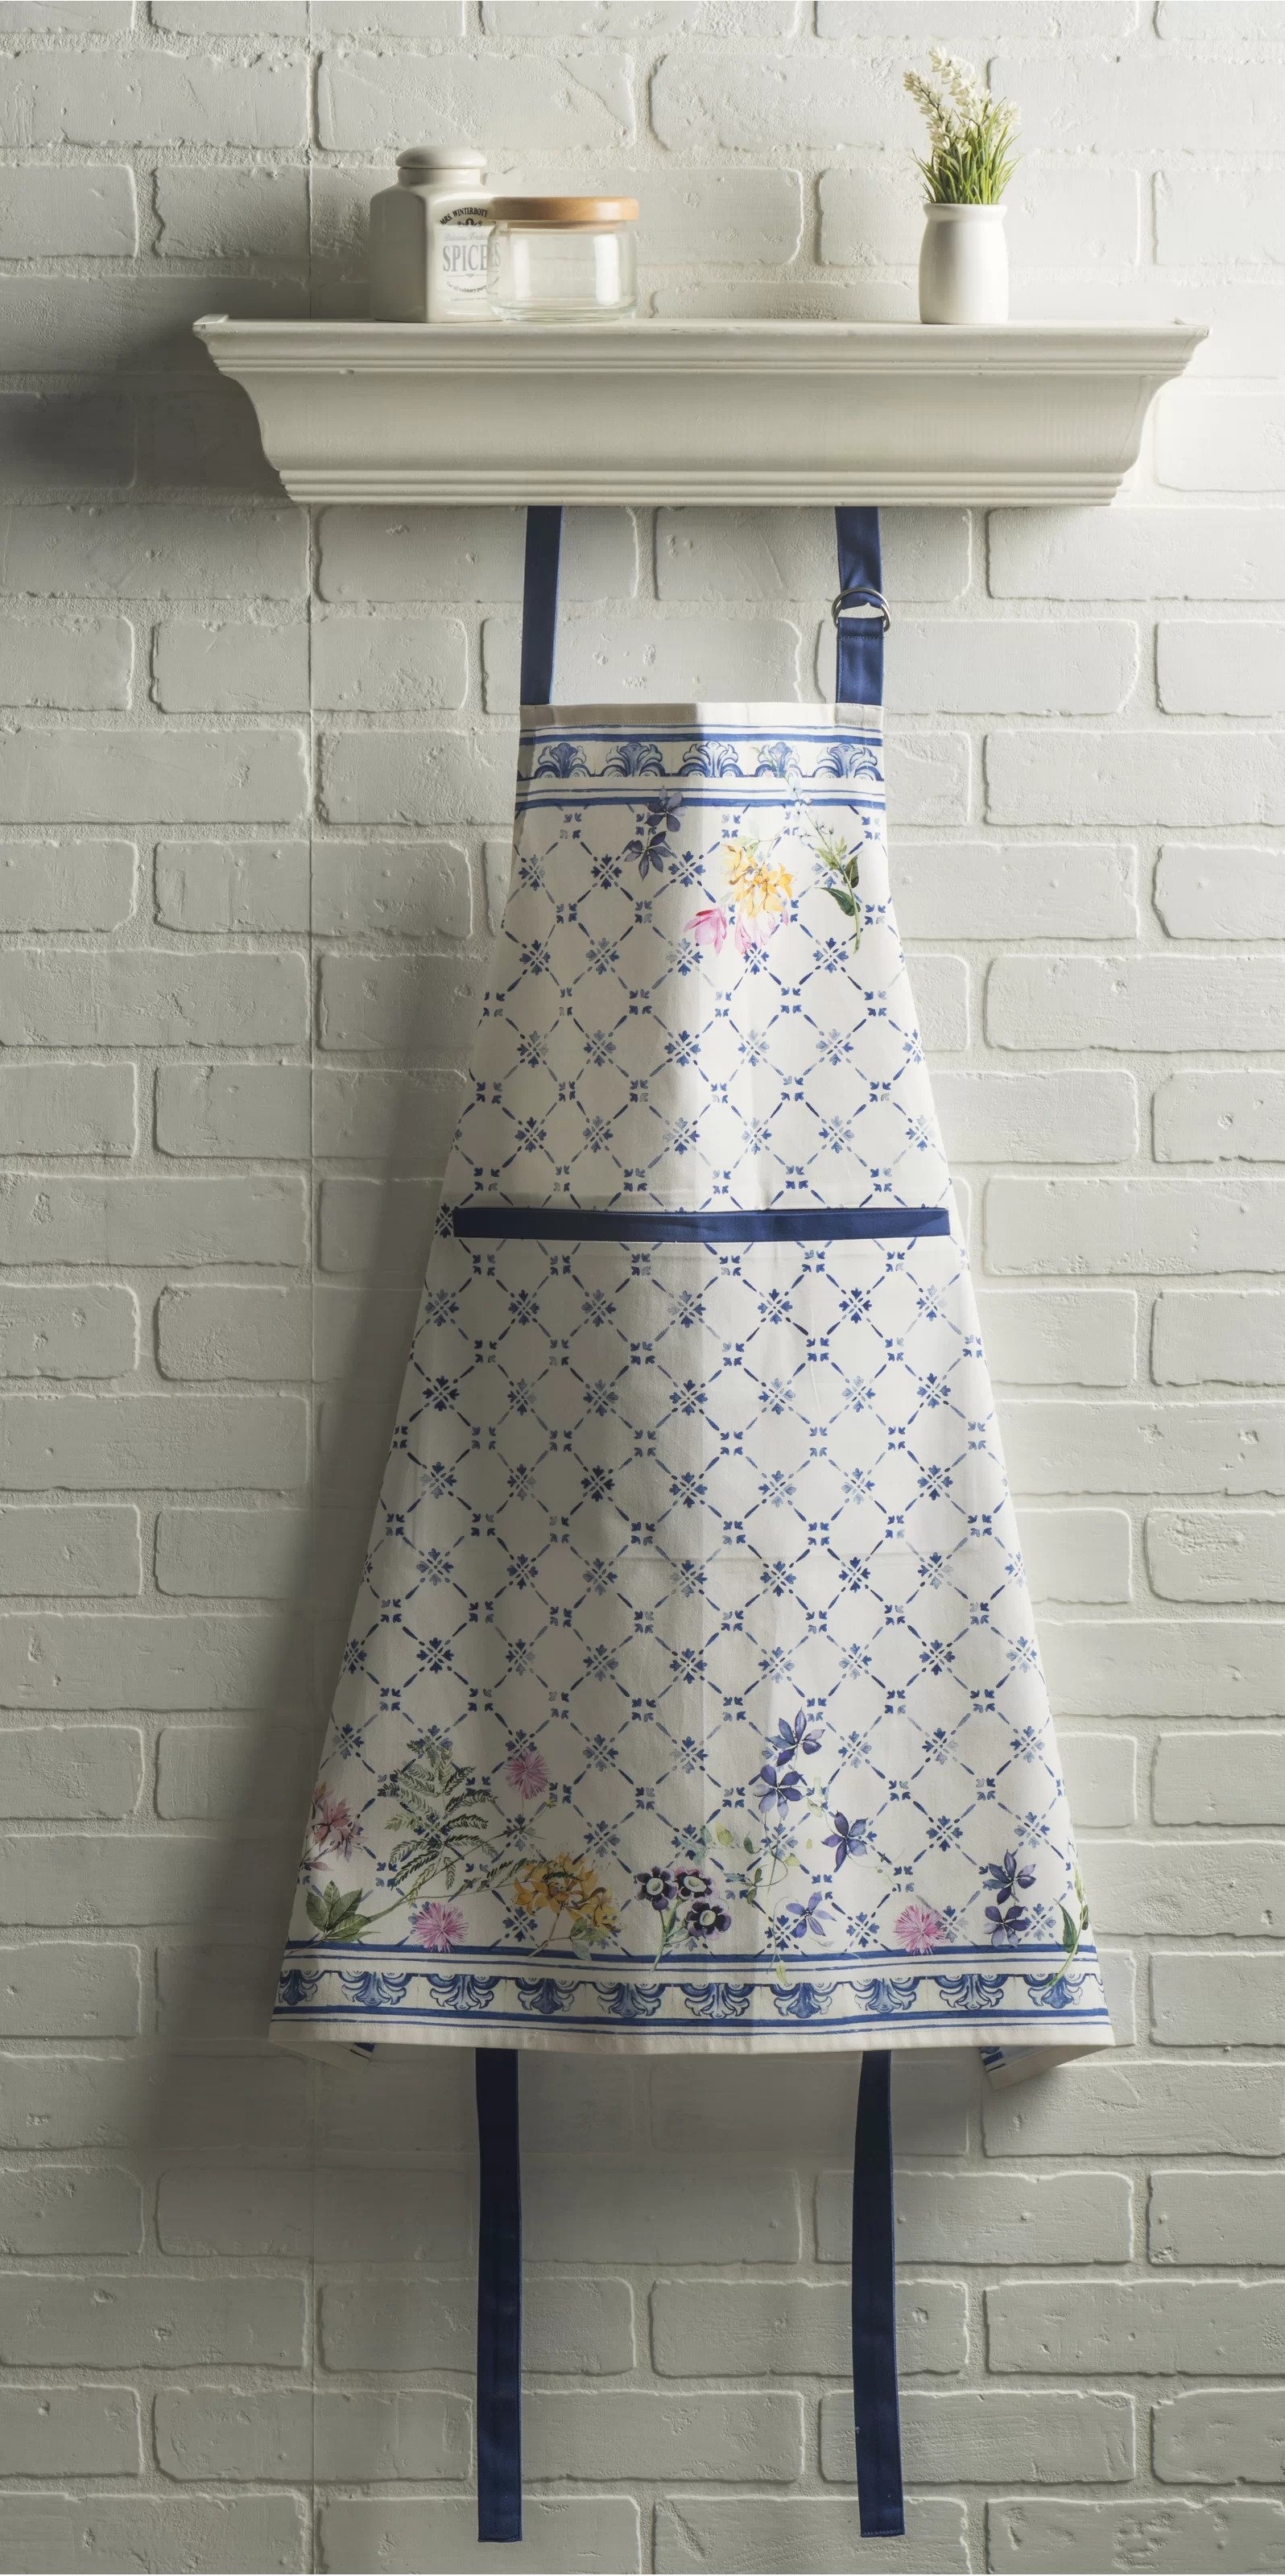 The apron in a blue and white design